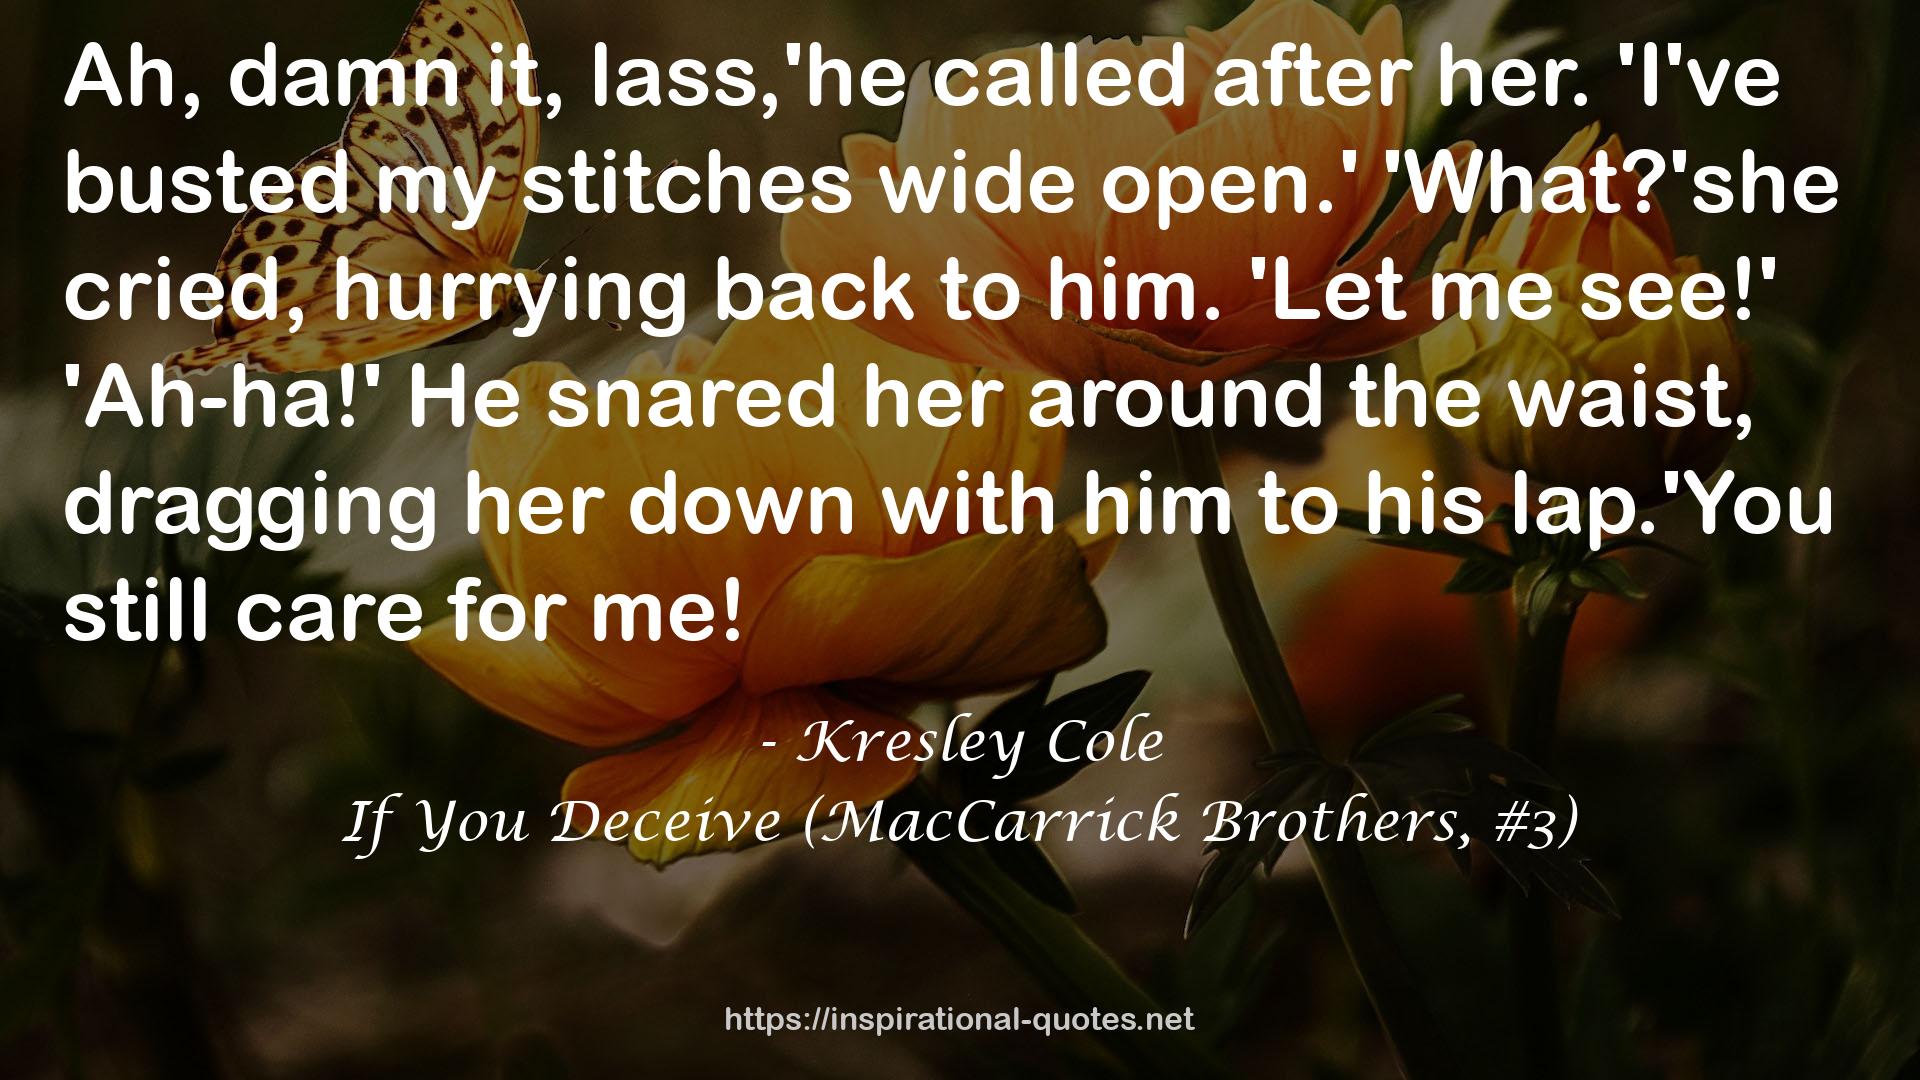 If You Deceive (MacCarrick Brothers, #3) QUOTES